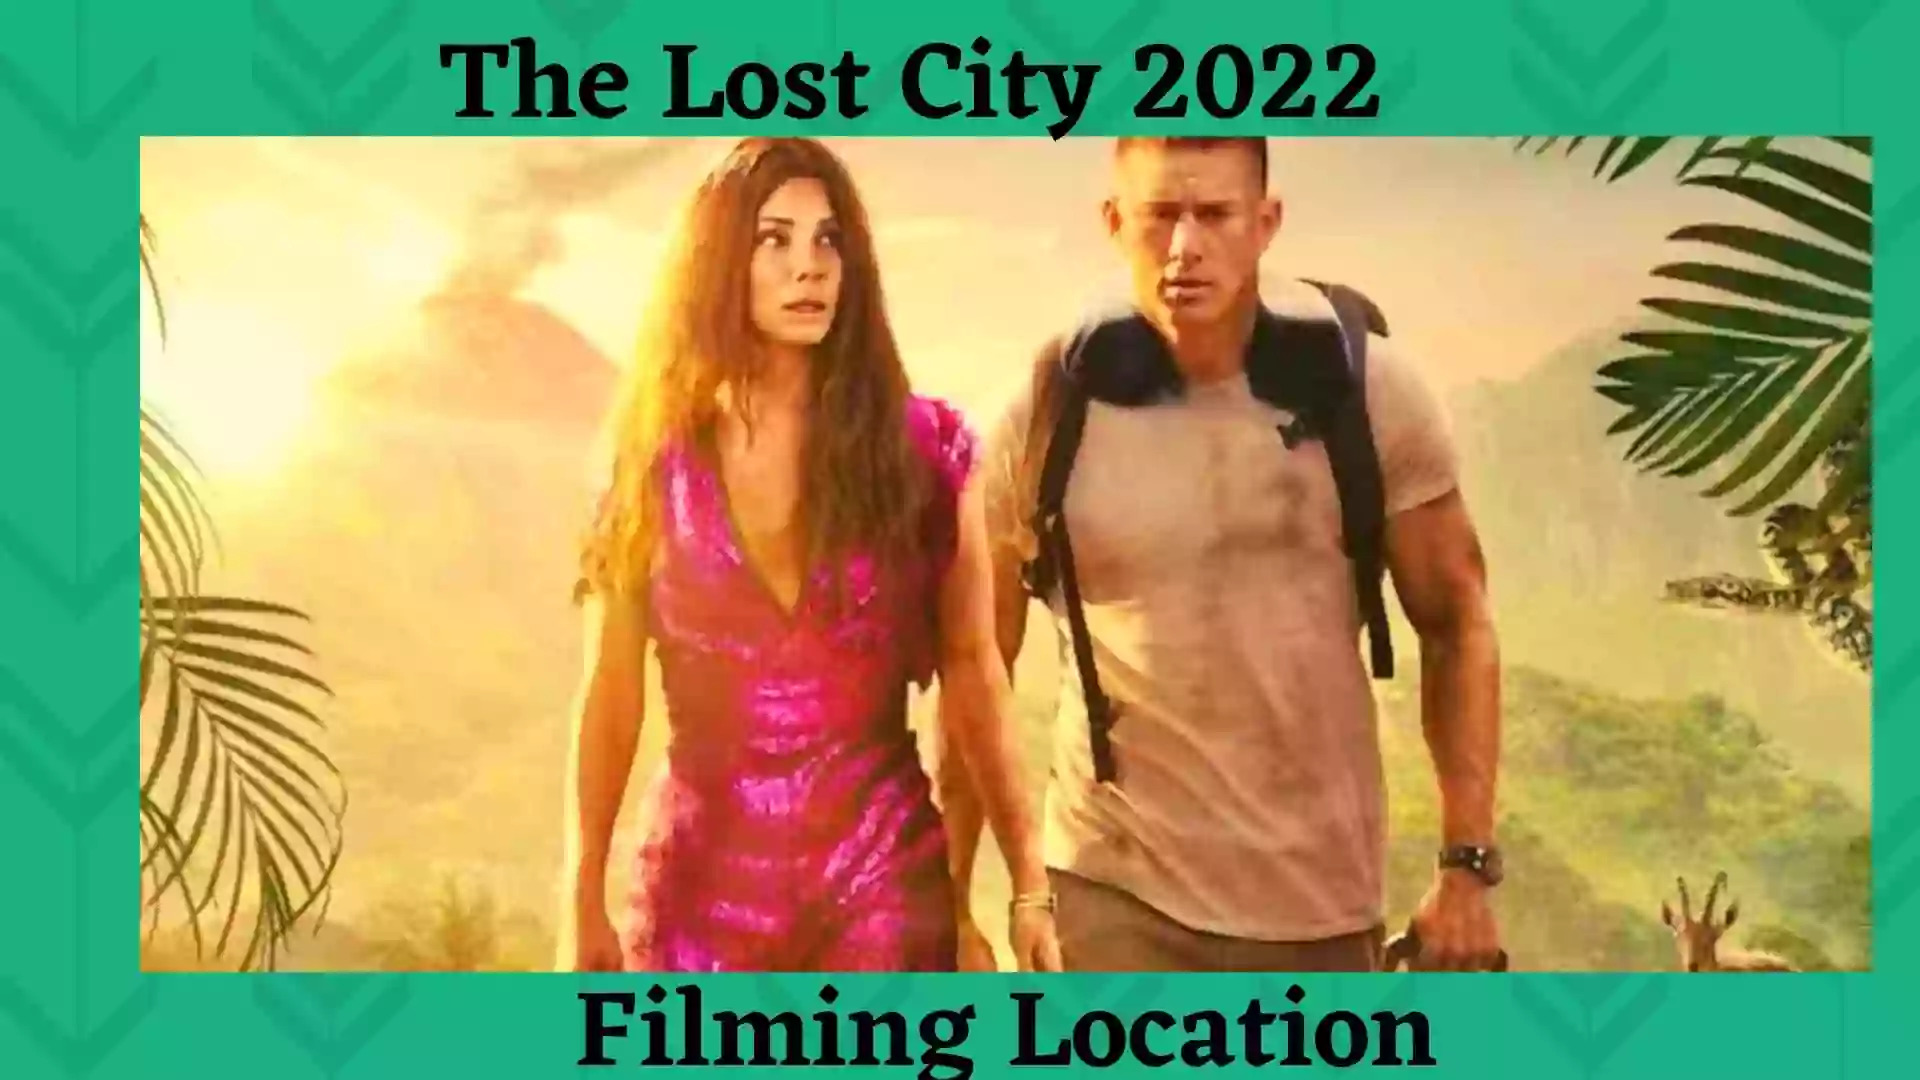 The Lost City Filming Location | The Lost City Shooting 2022